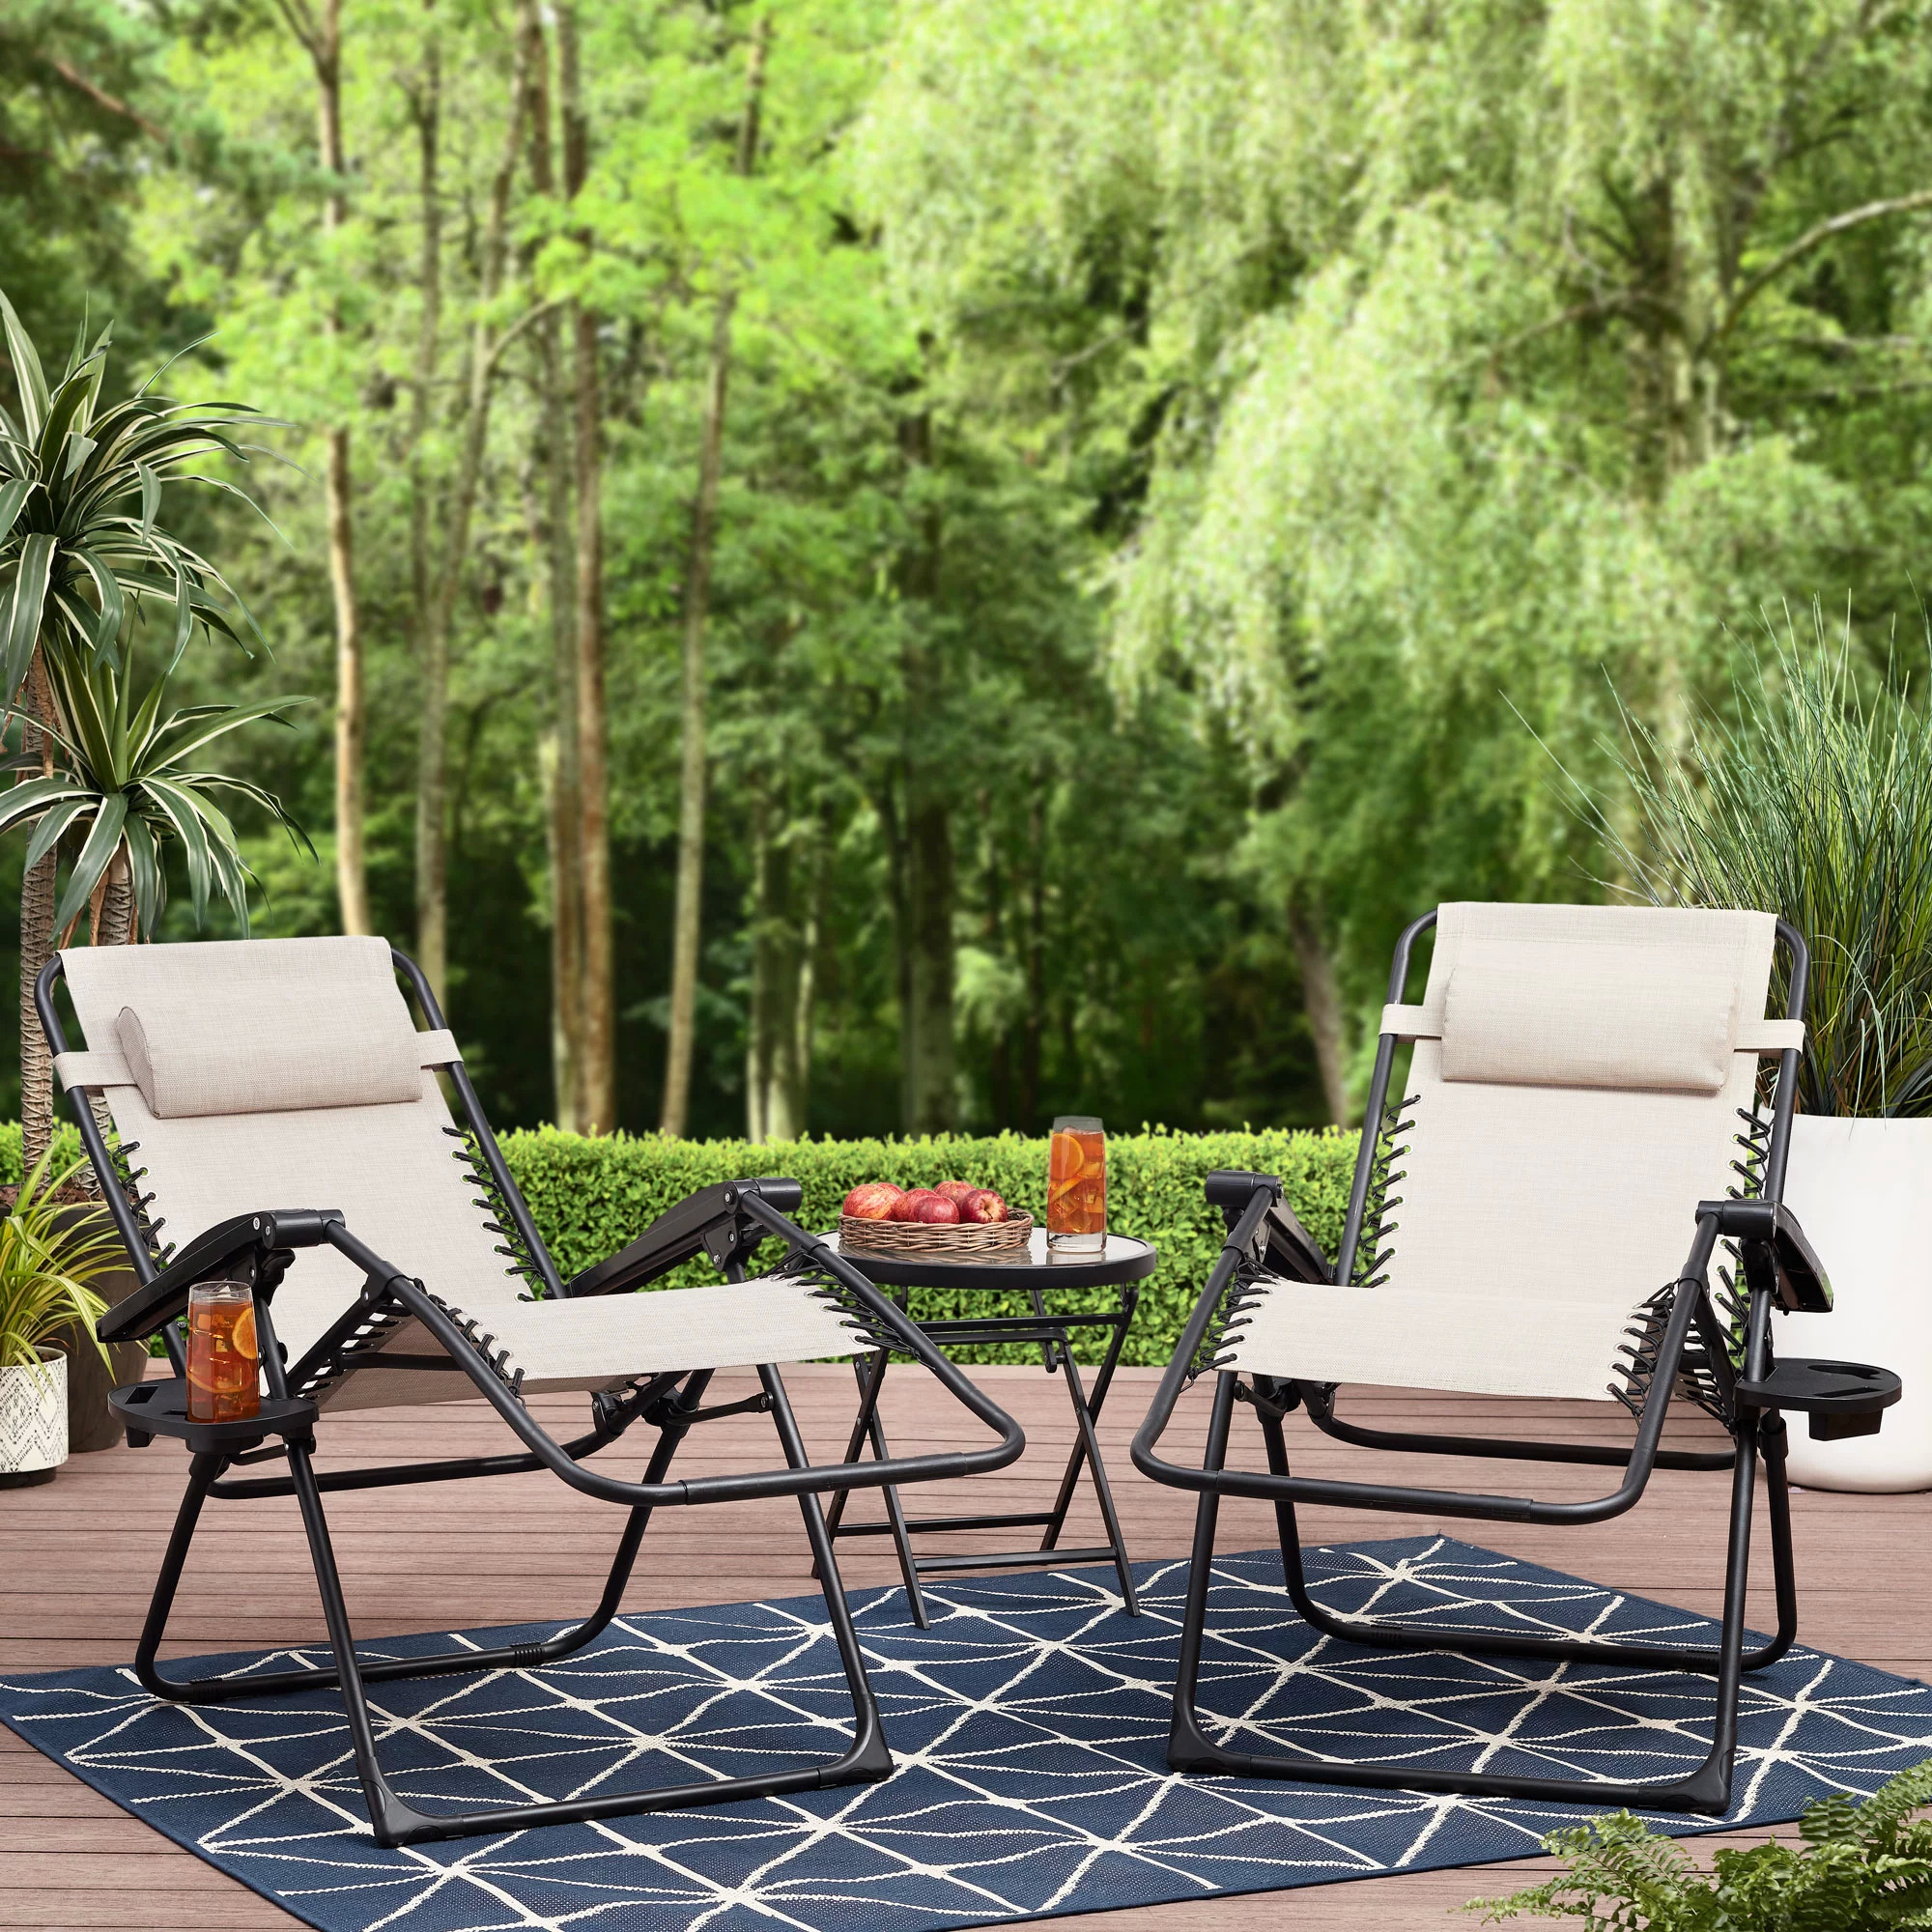 2-Count Mainstays Outdoor Zero Gravity Lounge Chair (Tan) $40 + Free Shipping